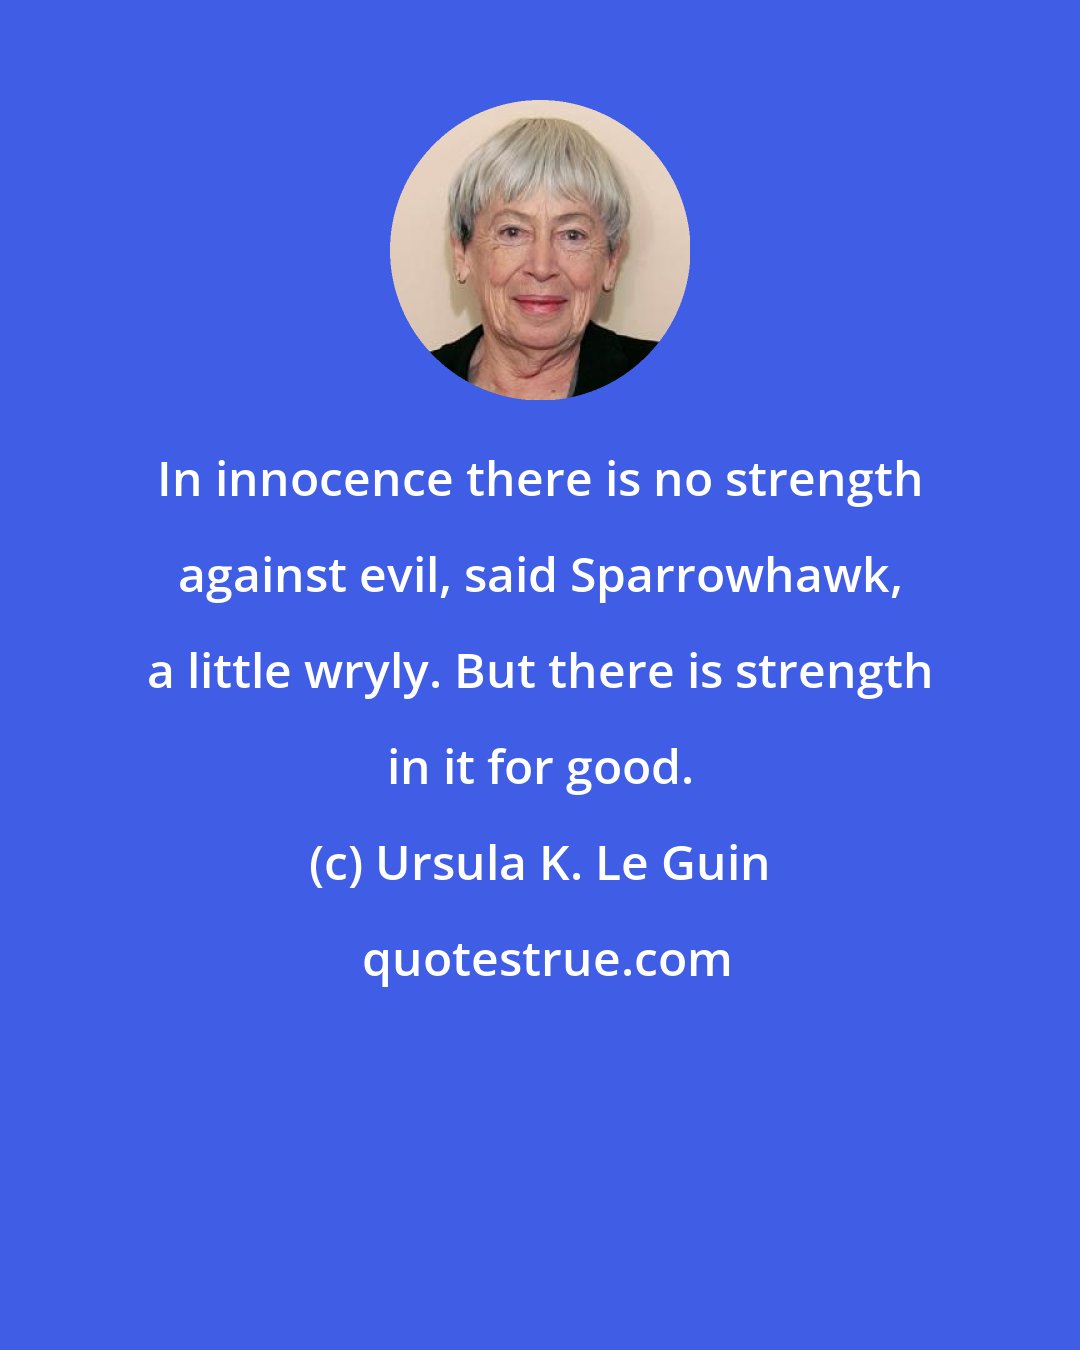 Ursula K. Le Guin: In innocence there is no strength against evil, said Sparrowhawk, a little wryly. But there is strength in it for good.